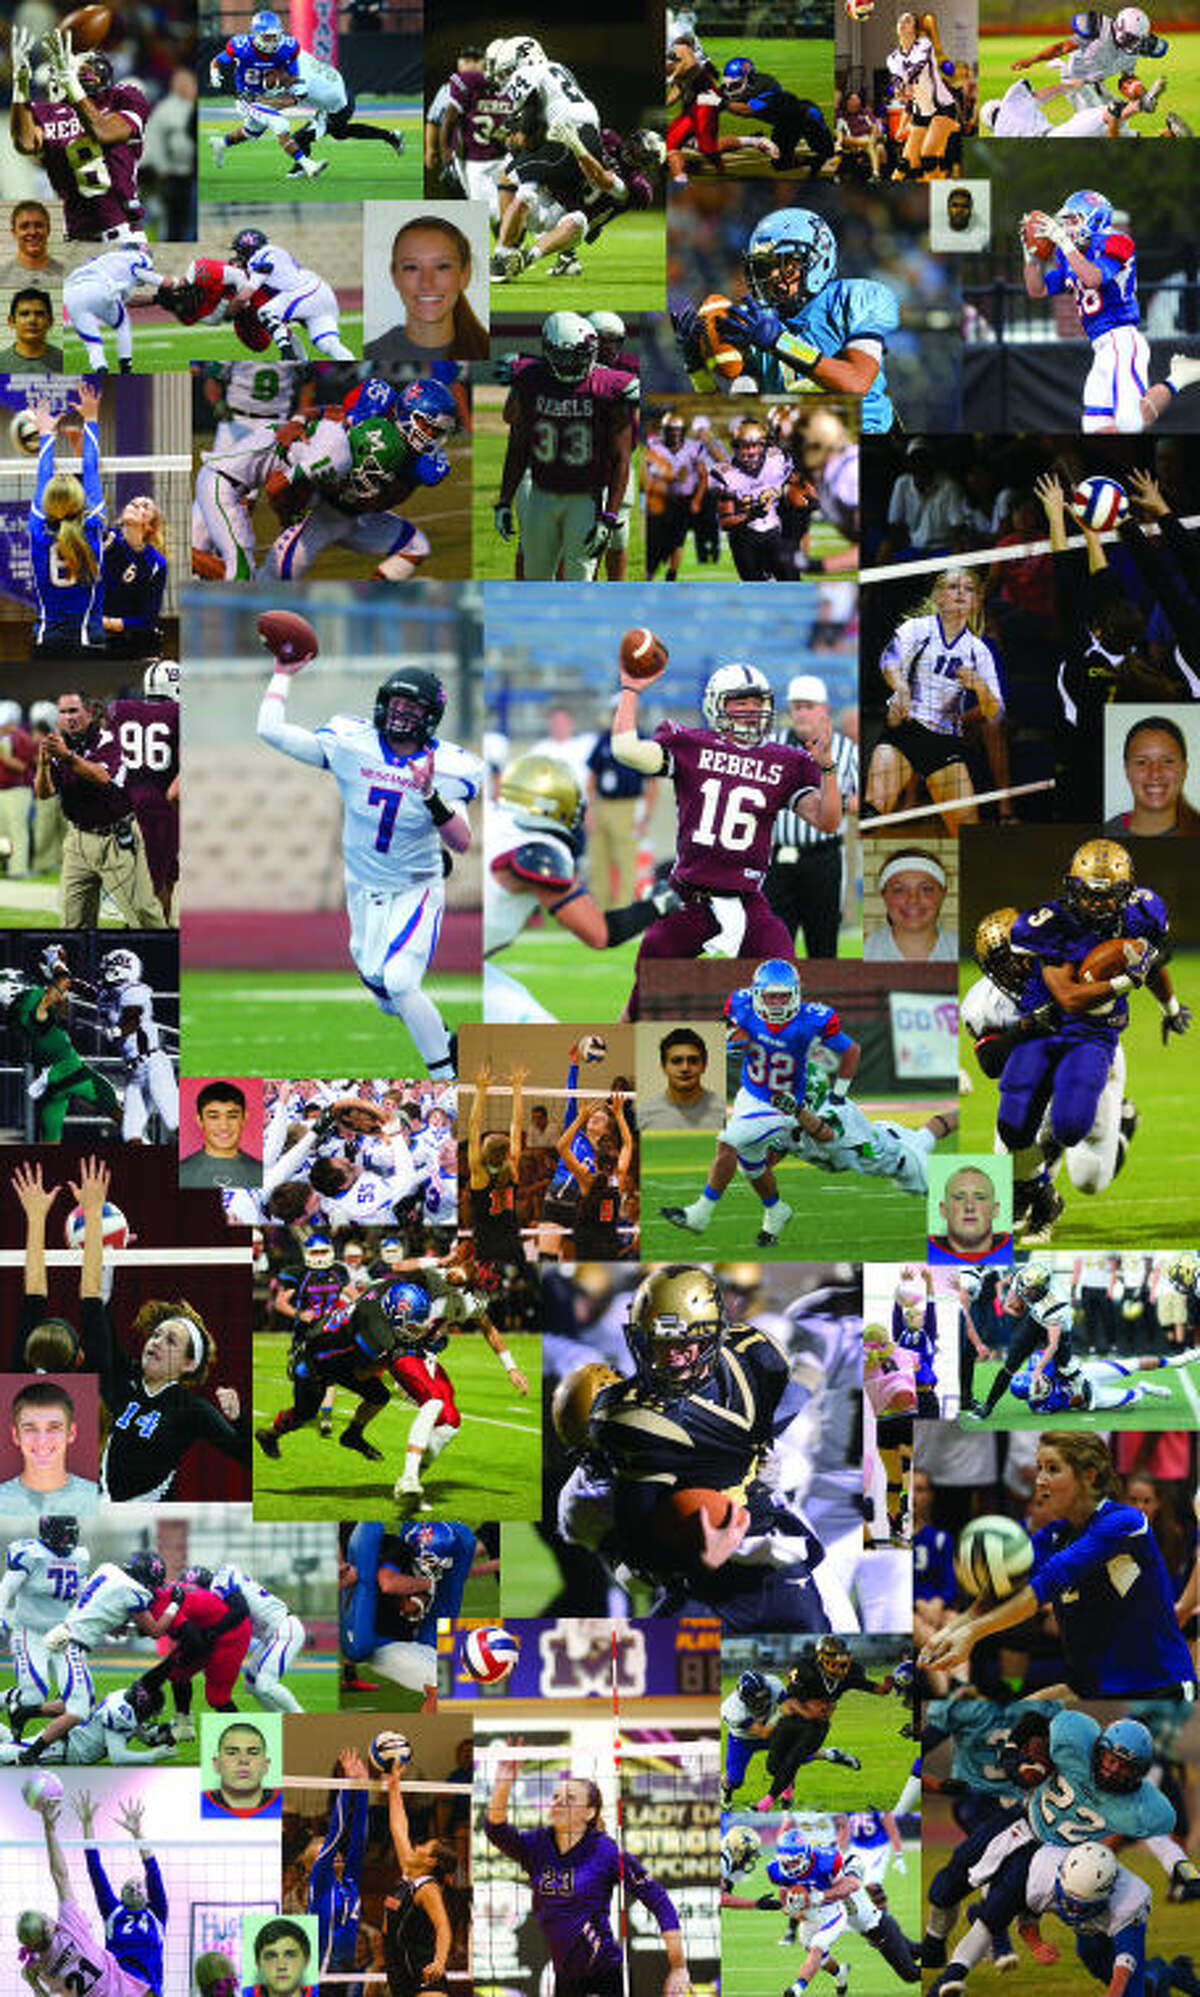 A collage of the athletes from Midland County and around the area that earned first team or superlative all-district honors this fall.